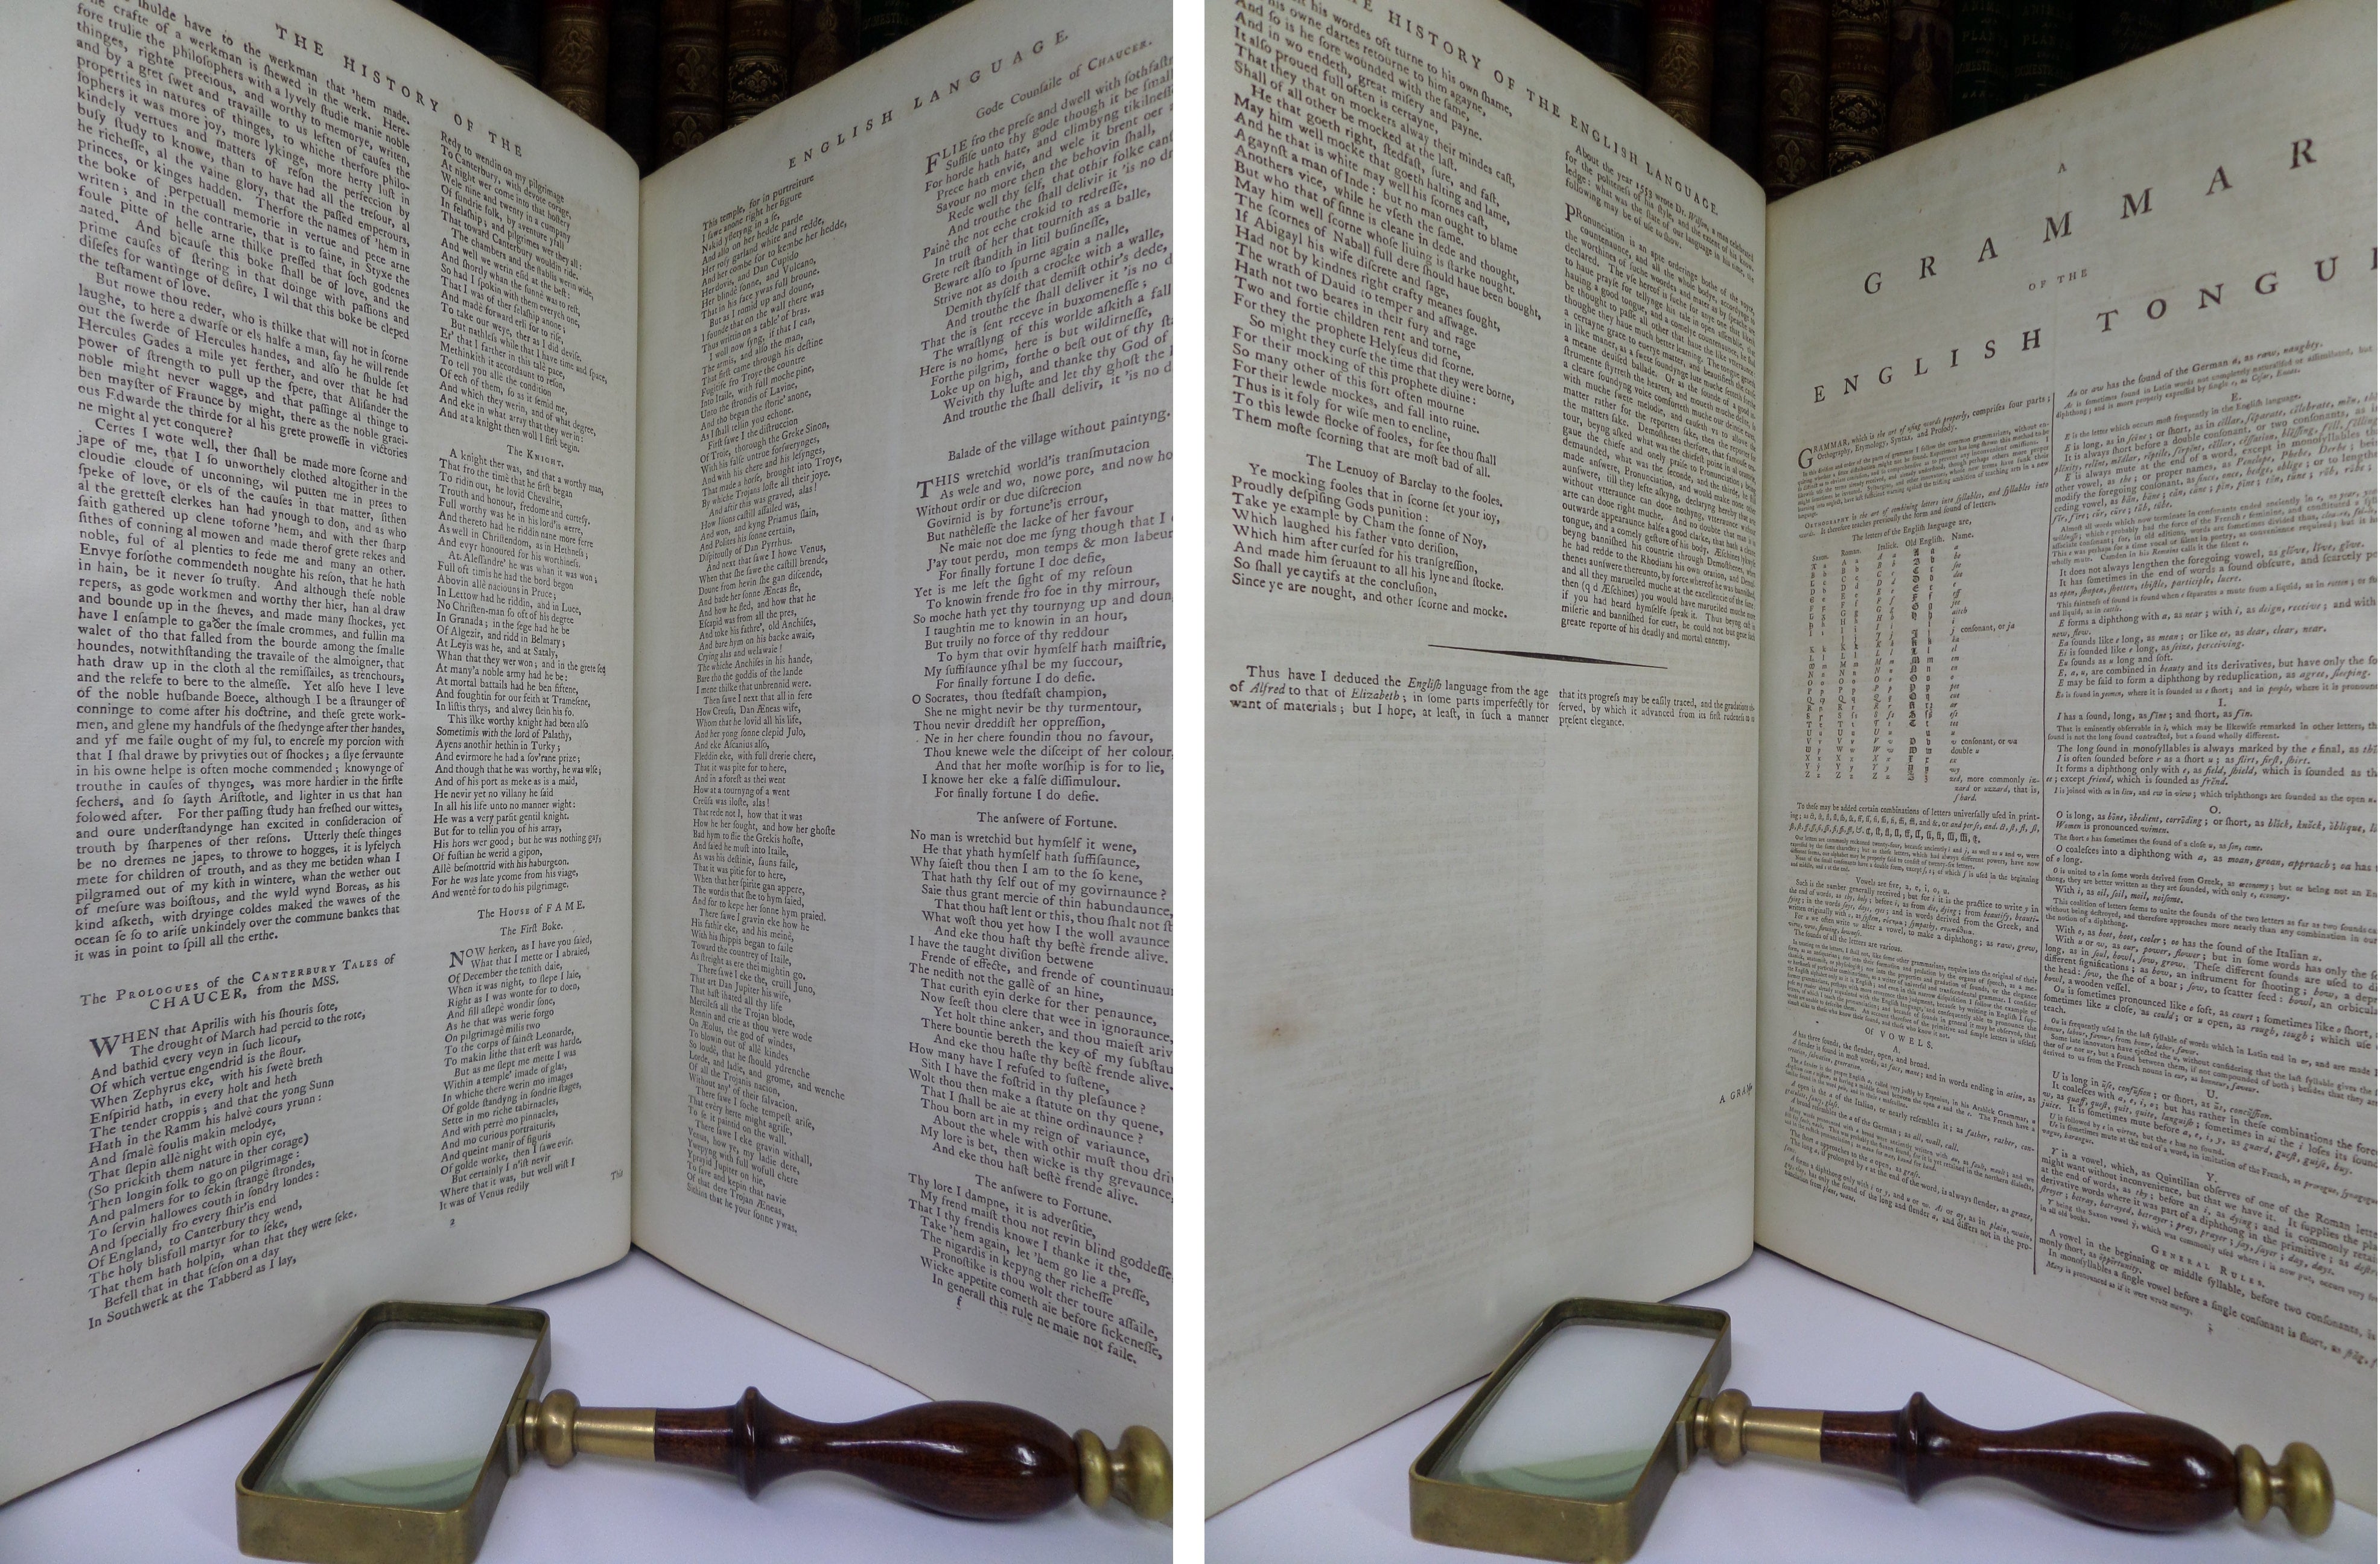 A DICTIONARY OF THE ENGLISH LANGUAGE BY SAMUEL JOHNSON 1785 THE SEVENTH EDITION